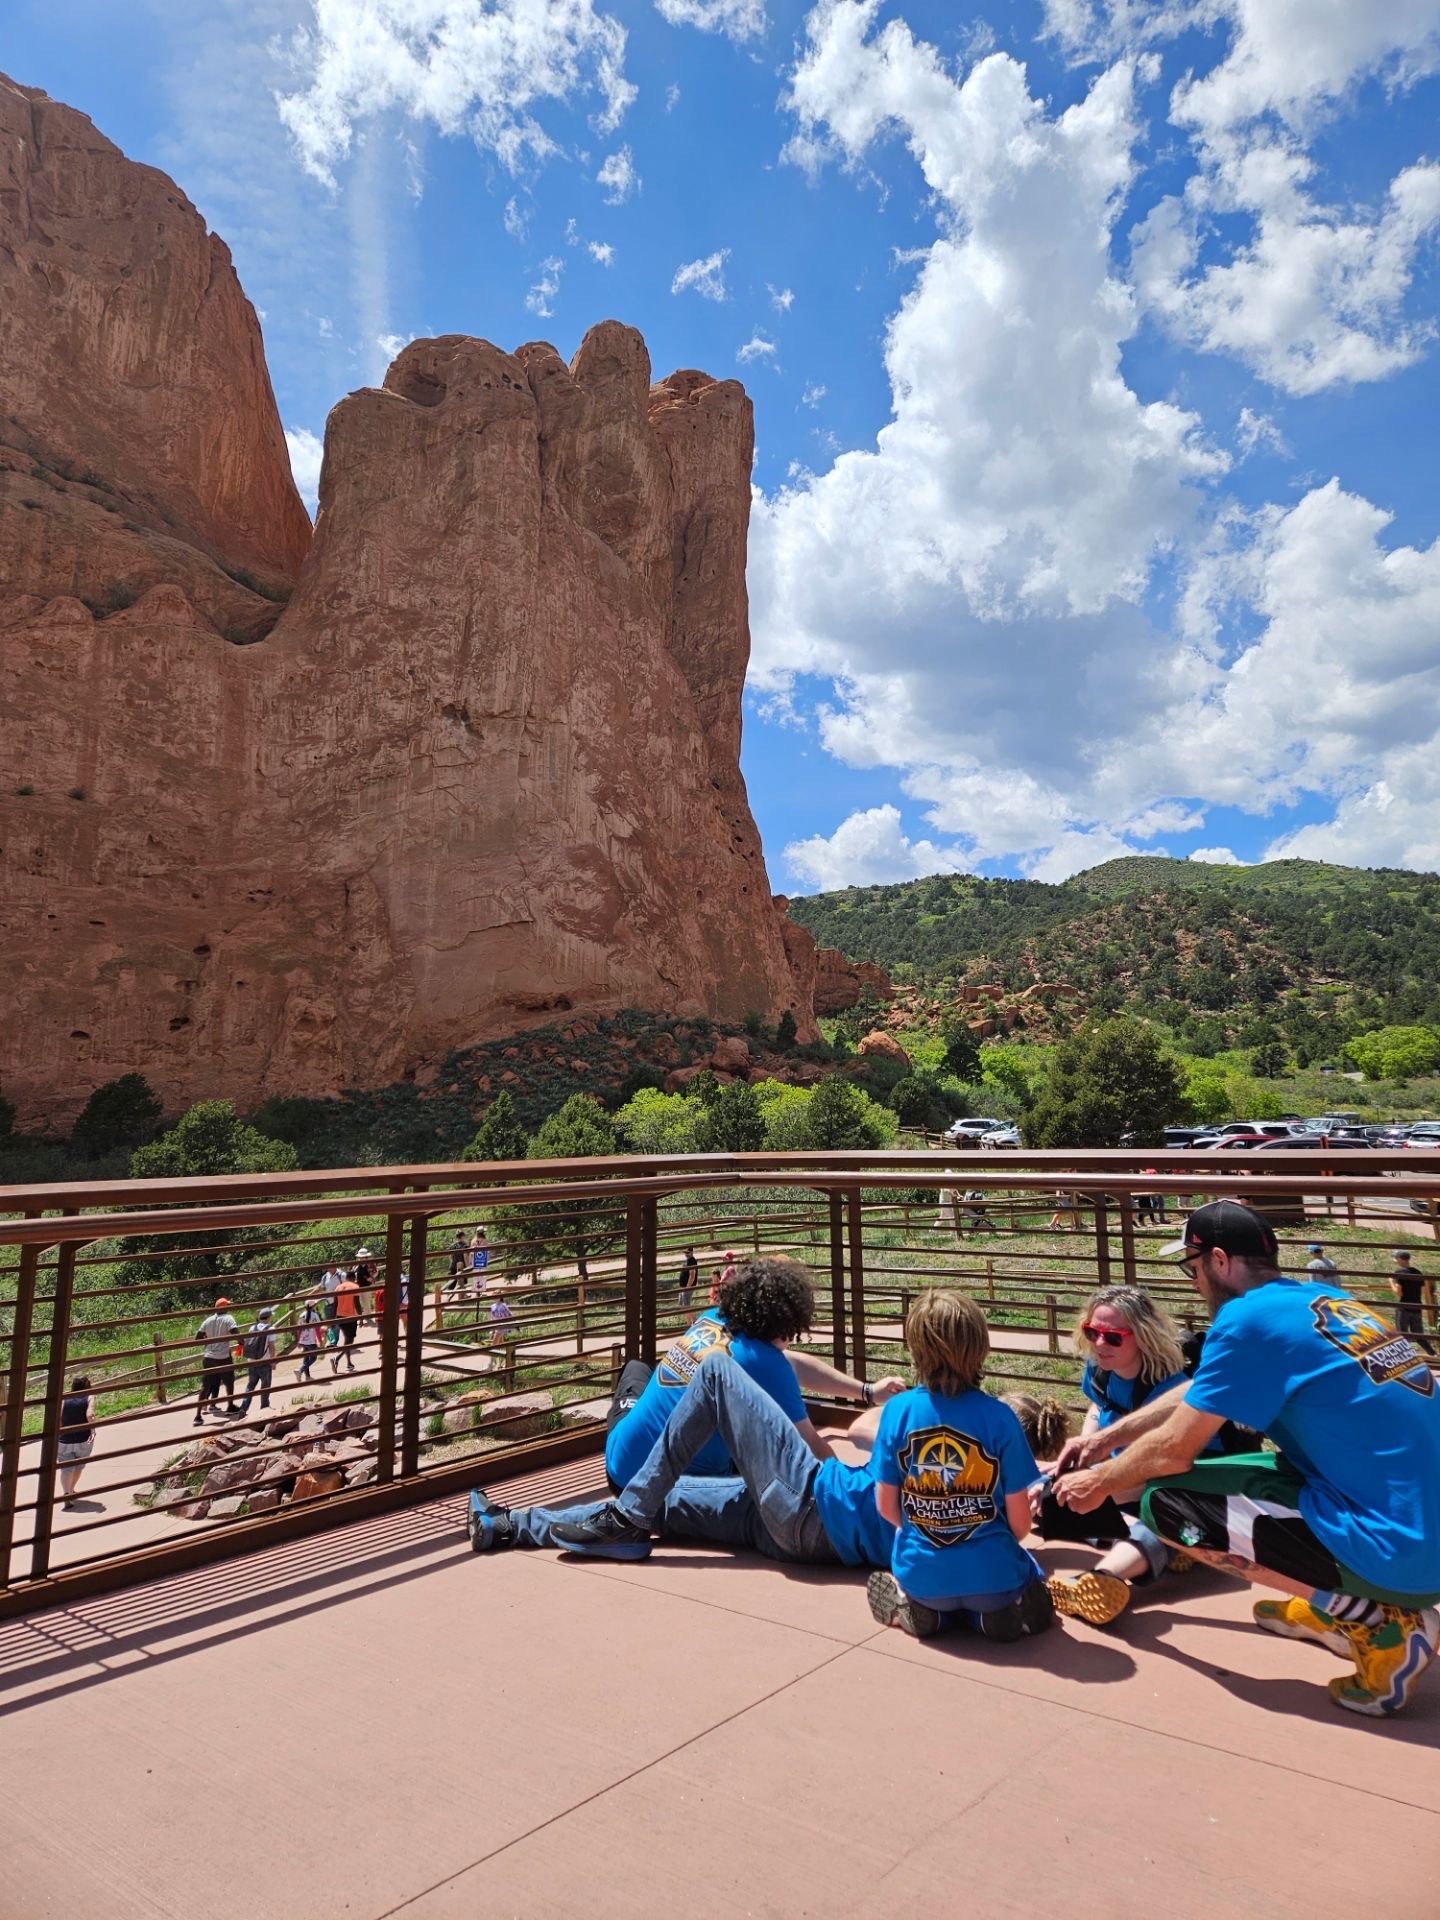 group of people in garden of the gods